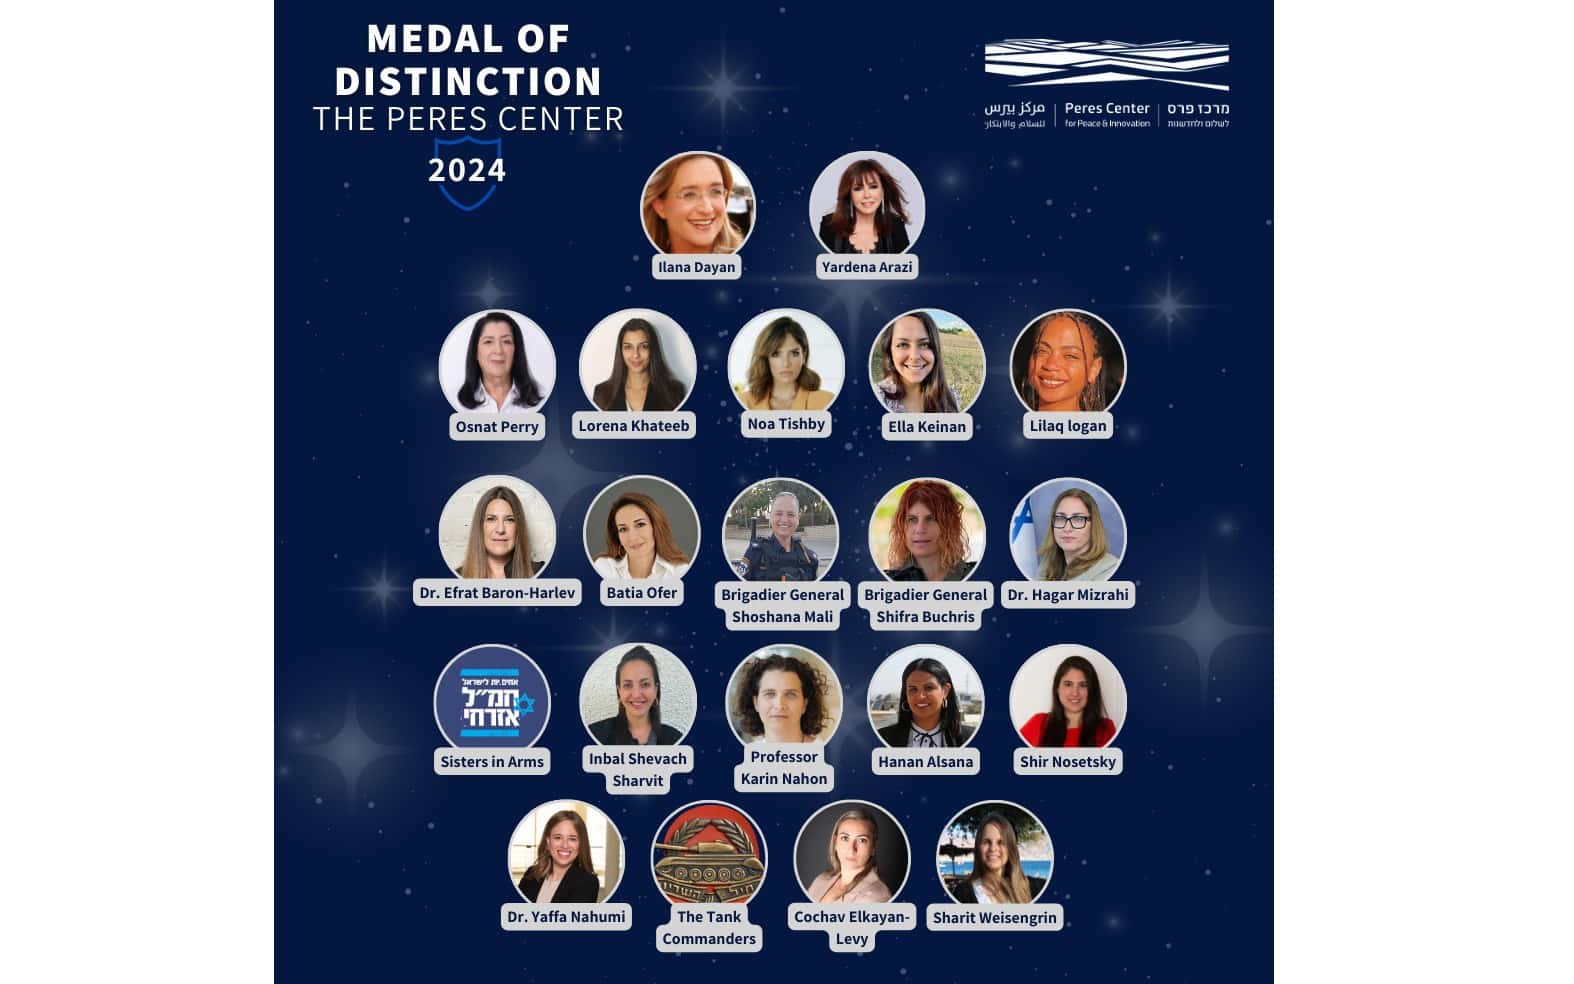 A collage of the Medal of Distinction winners from the Peres Center for Peace and Innovation. Photo courtesy of the Peres Center